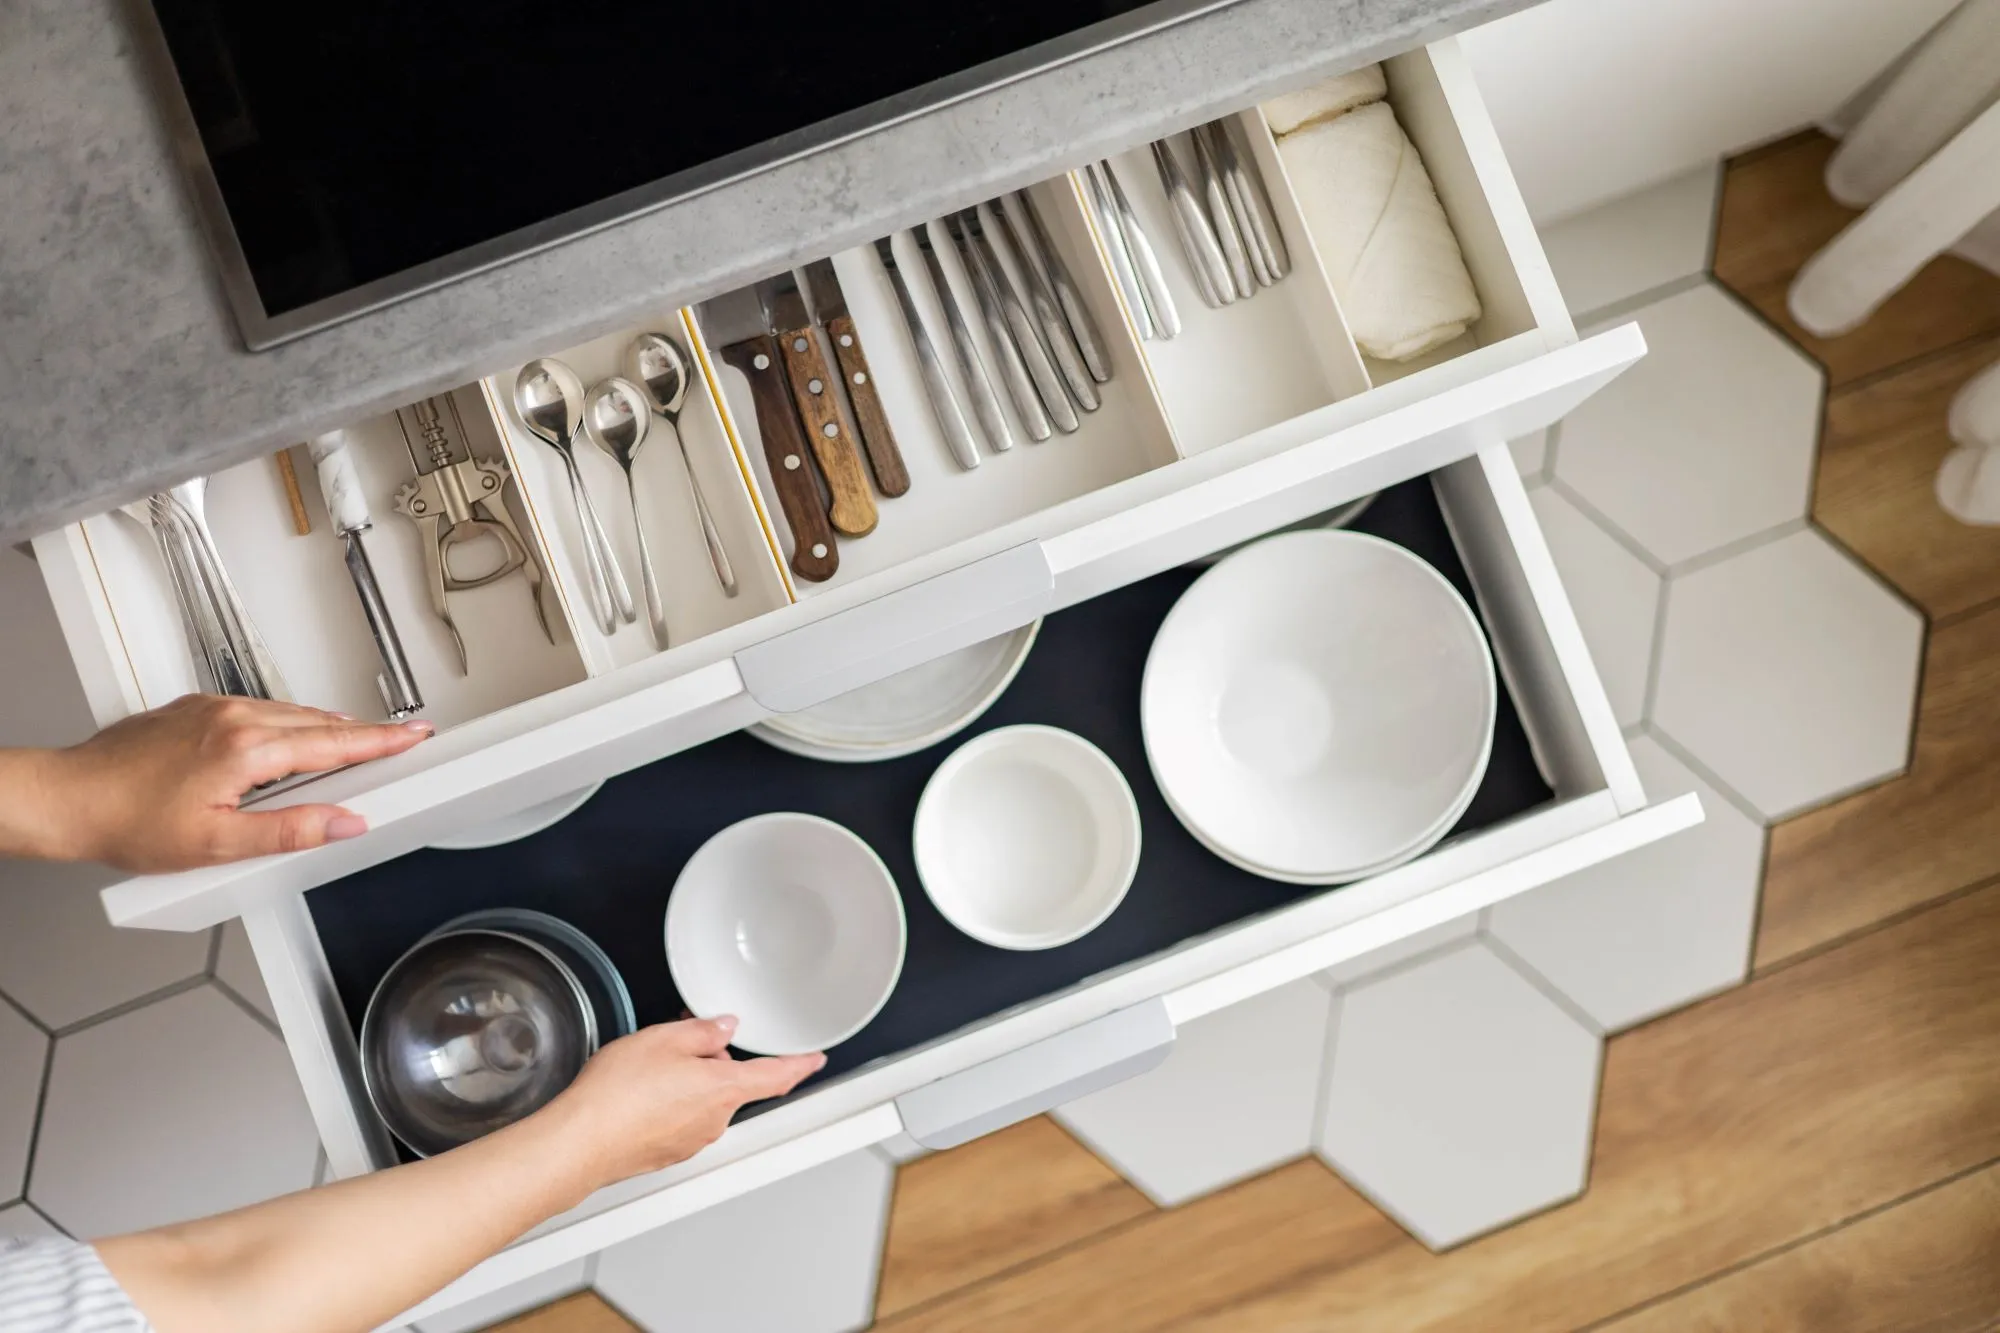 With the help of cabinet drawer dividers, you can avoid any confusion when trying to find specific kitchen items.